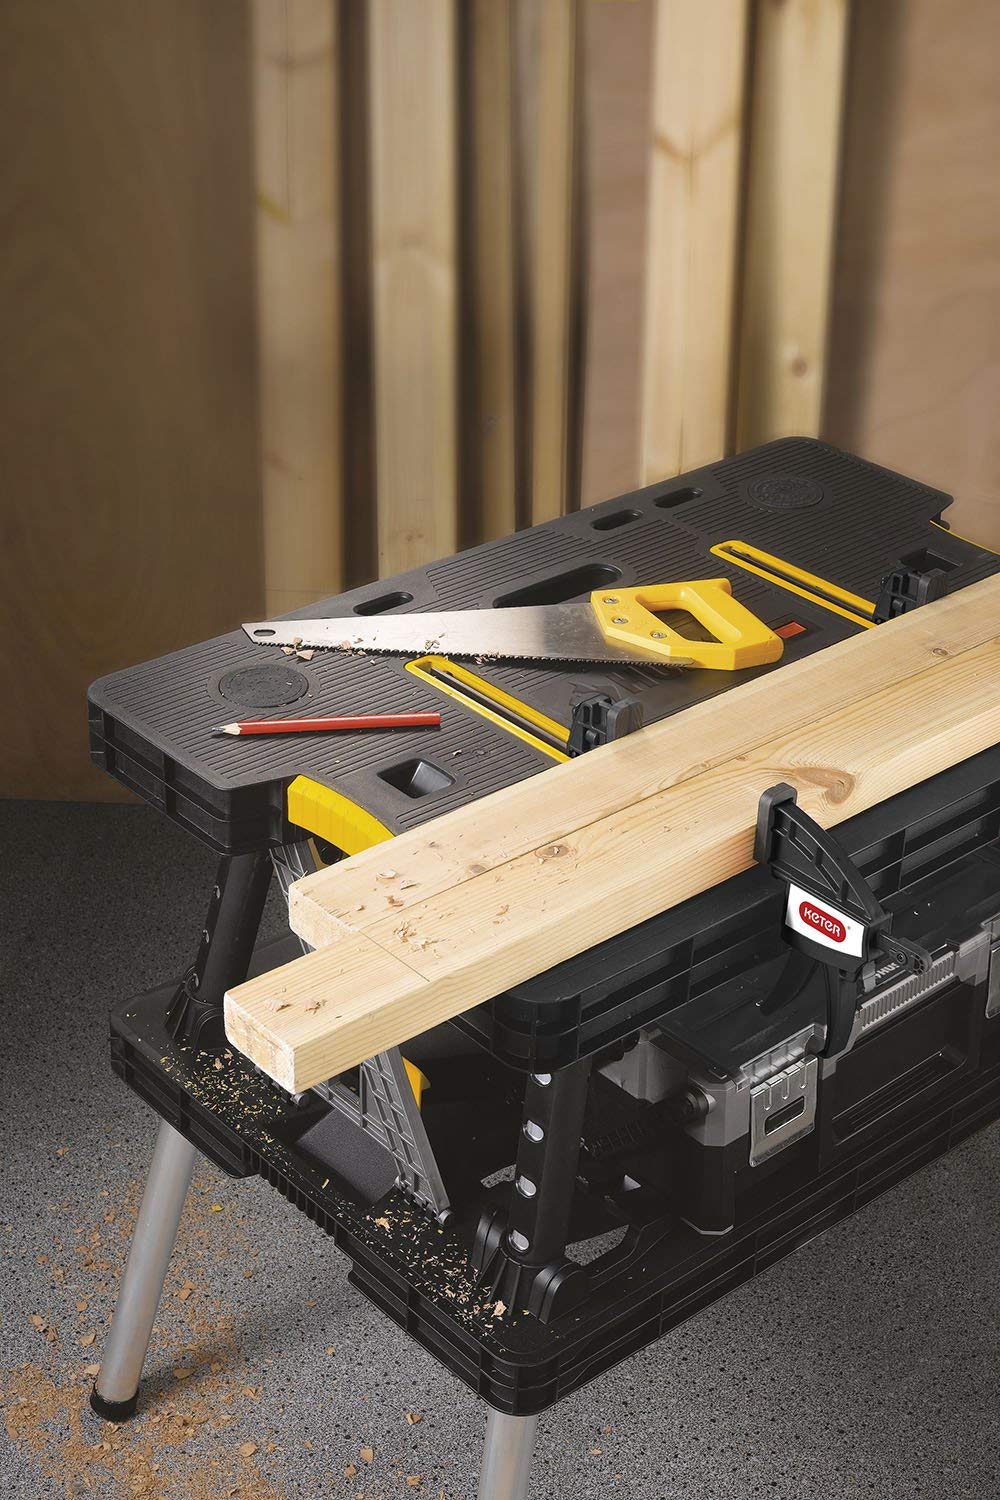 Ryobi RWT2CL Folding Work Table is A Rebranded Keter - Tool